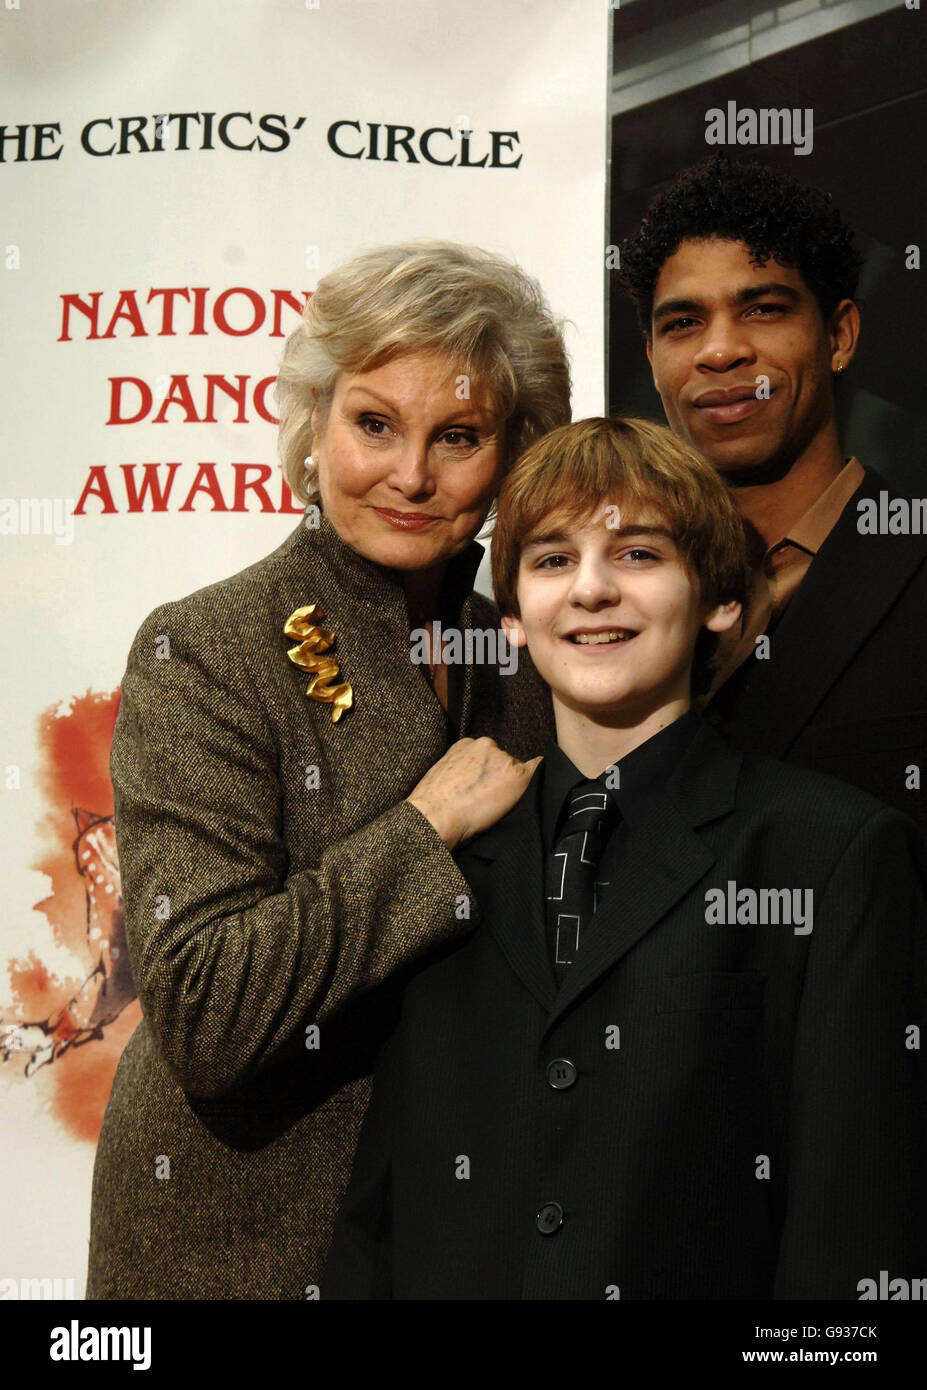 Dancers (L-R) Angela Rippon, Leon Cooke (Billy, in 'Billy Elliot') and Carlos Acosta during the Critics' Circle National Dance Awards 2006, at the Vilar Floral Hall in the Royal Opera House, central London, Thursday 19 January 2006. PRESS ASSOCIATION Photo. Photo credit should read: Yui Mok/PA Stock Photo